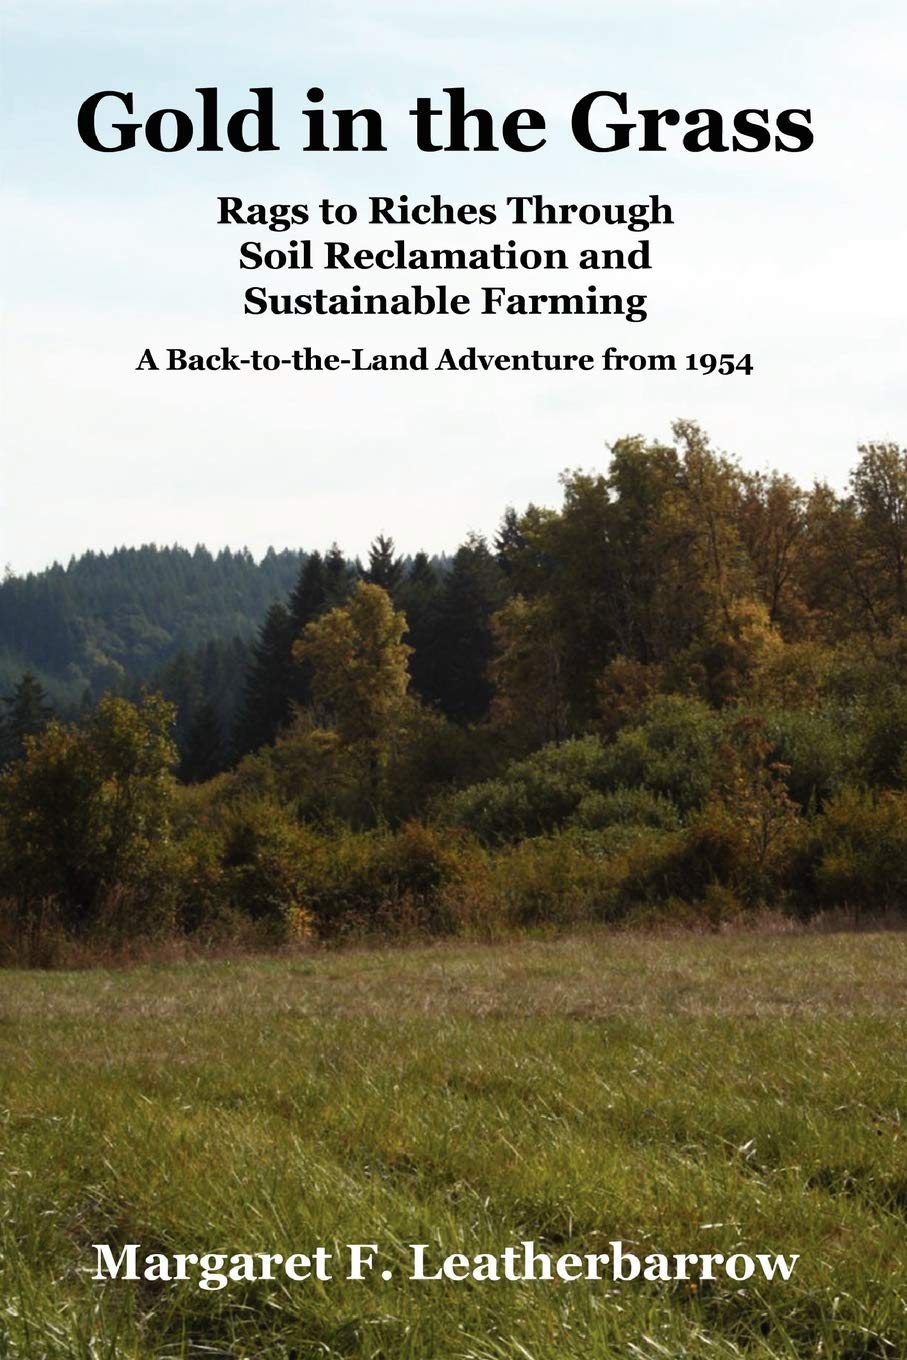 Gold in the Grass: Rags to Riches Through Soil Reclamation and Sustainable Farming